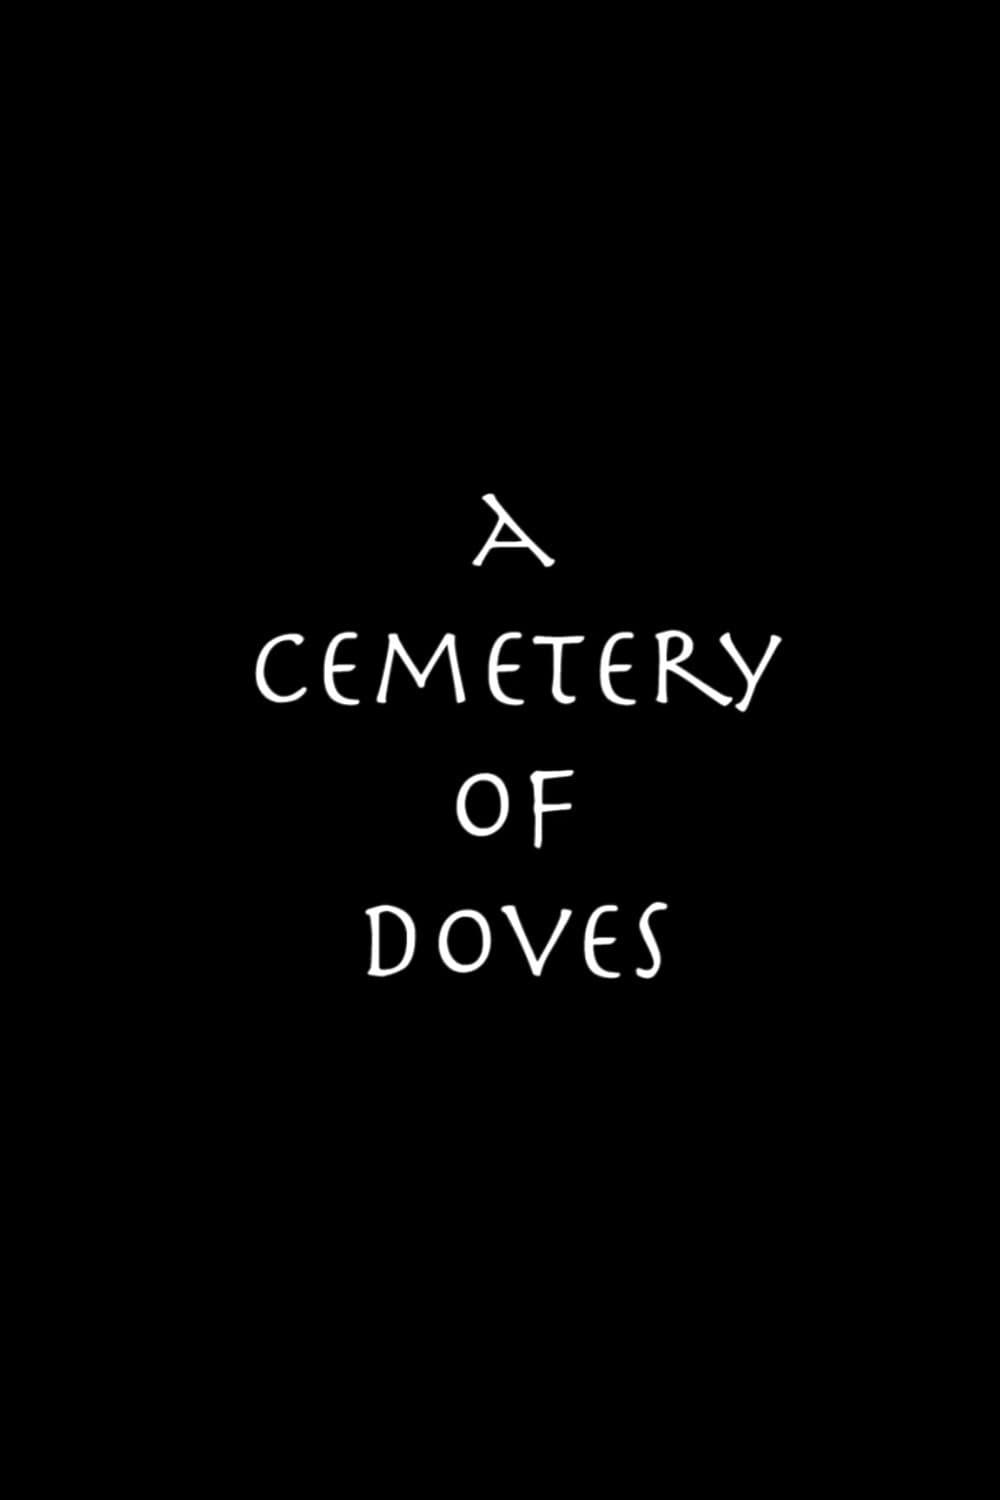 A Cemetery of Doves poster